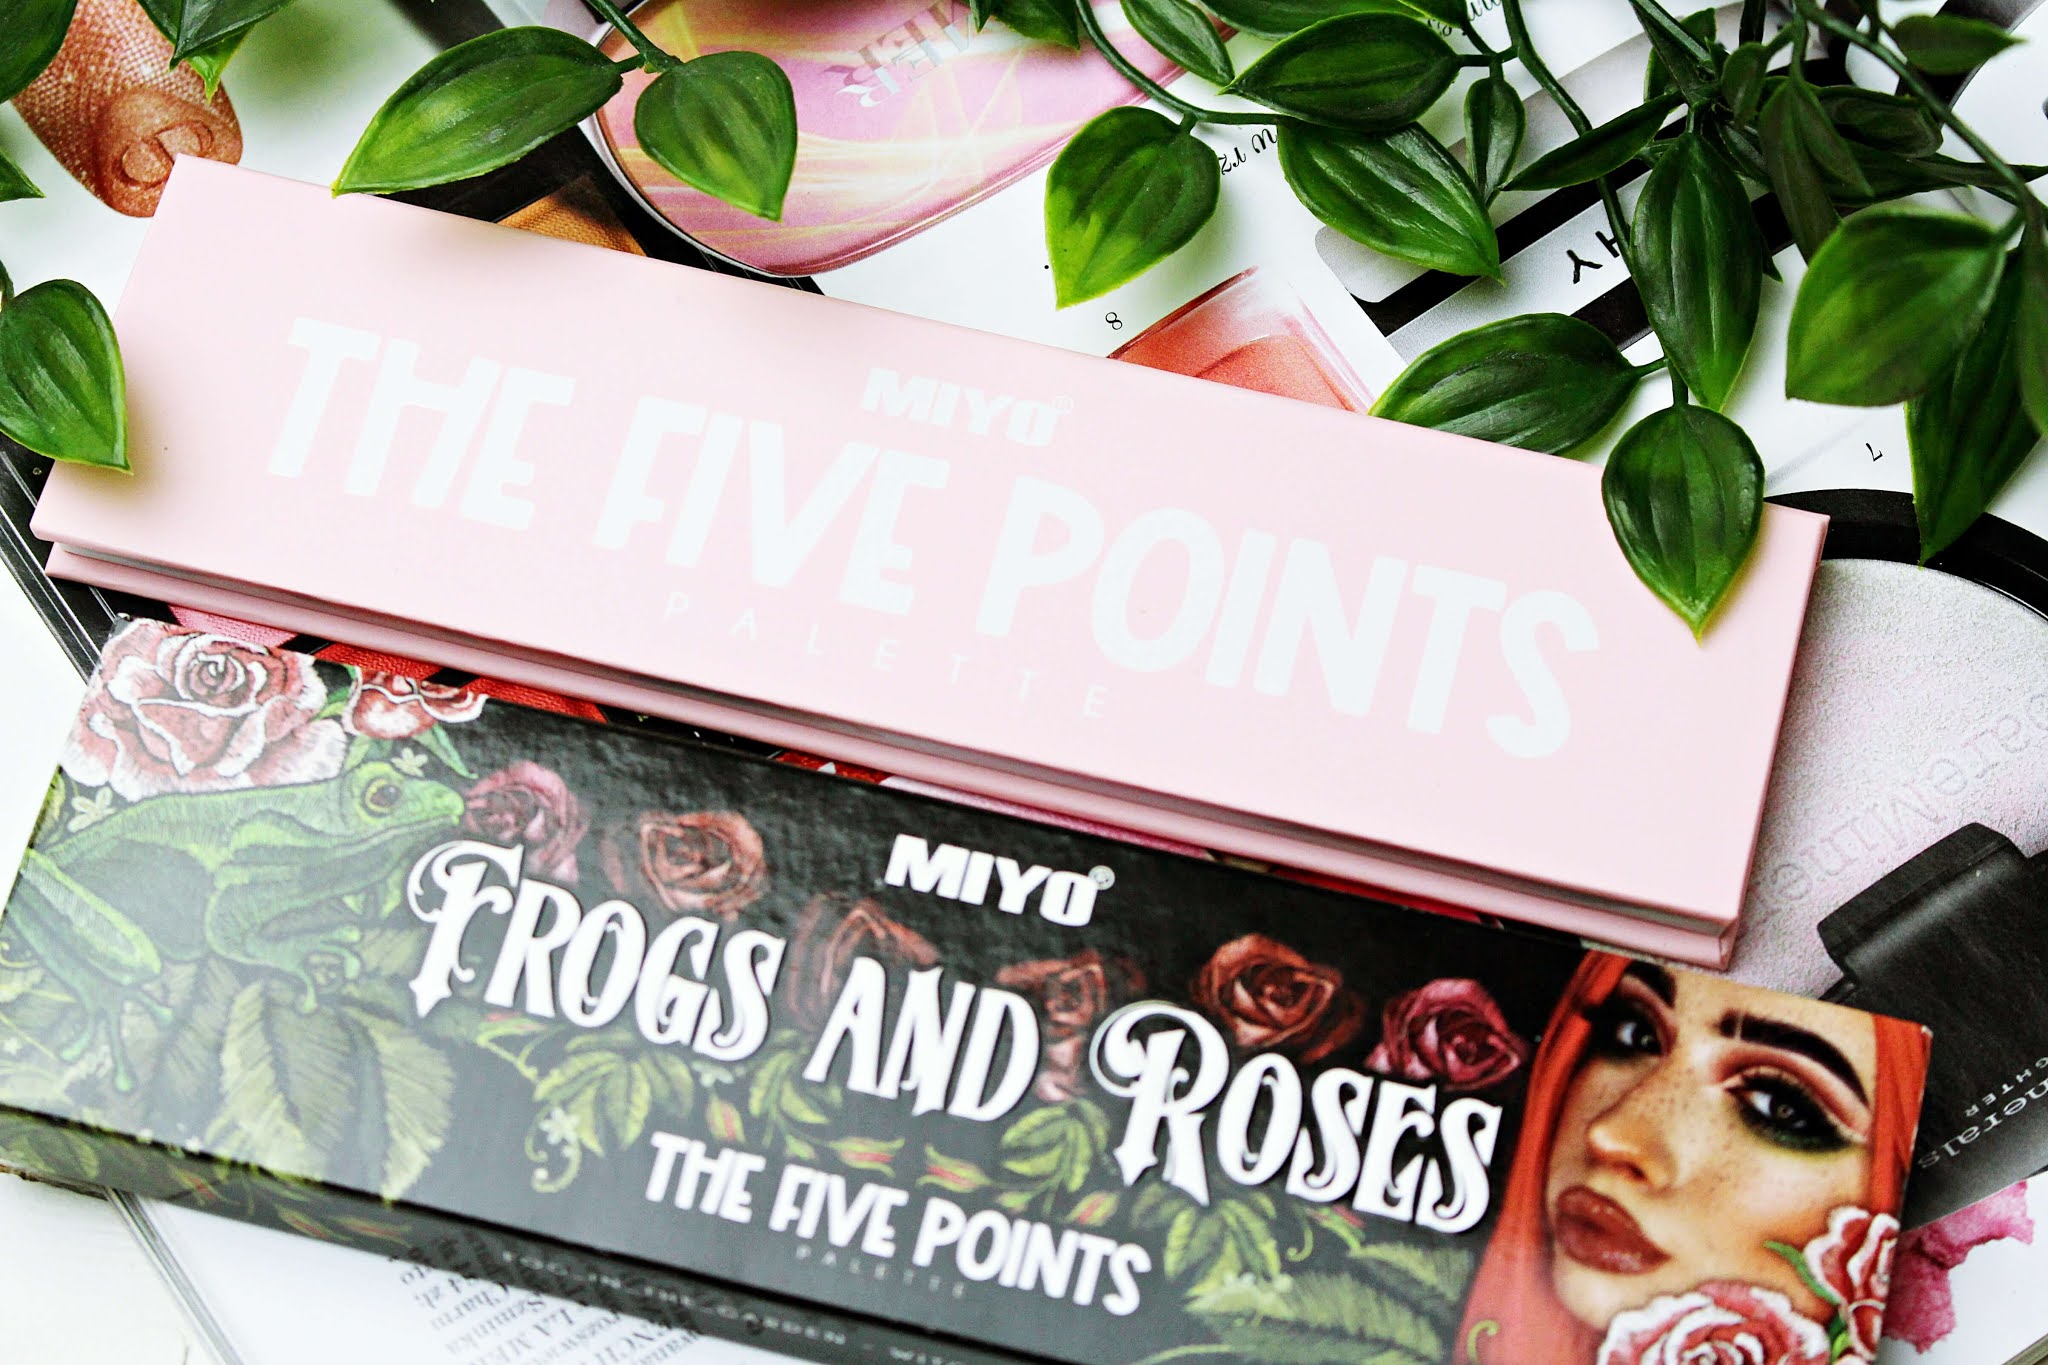 Paletka cieni do powiek MIYO Frogs and Roses Five Points Palette